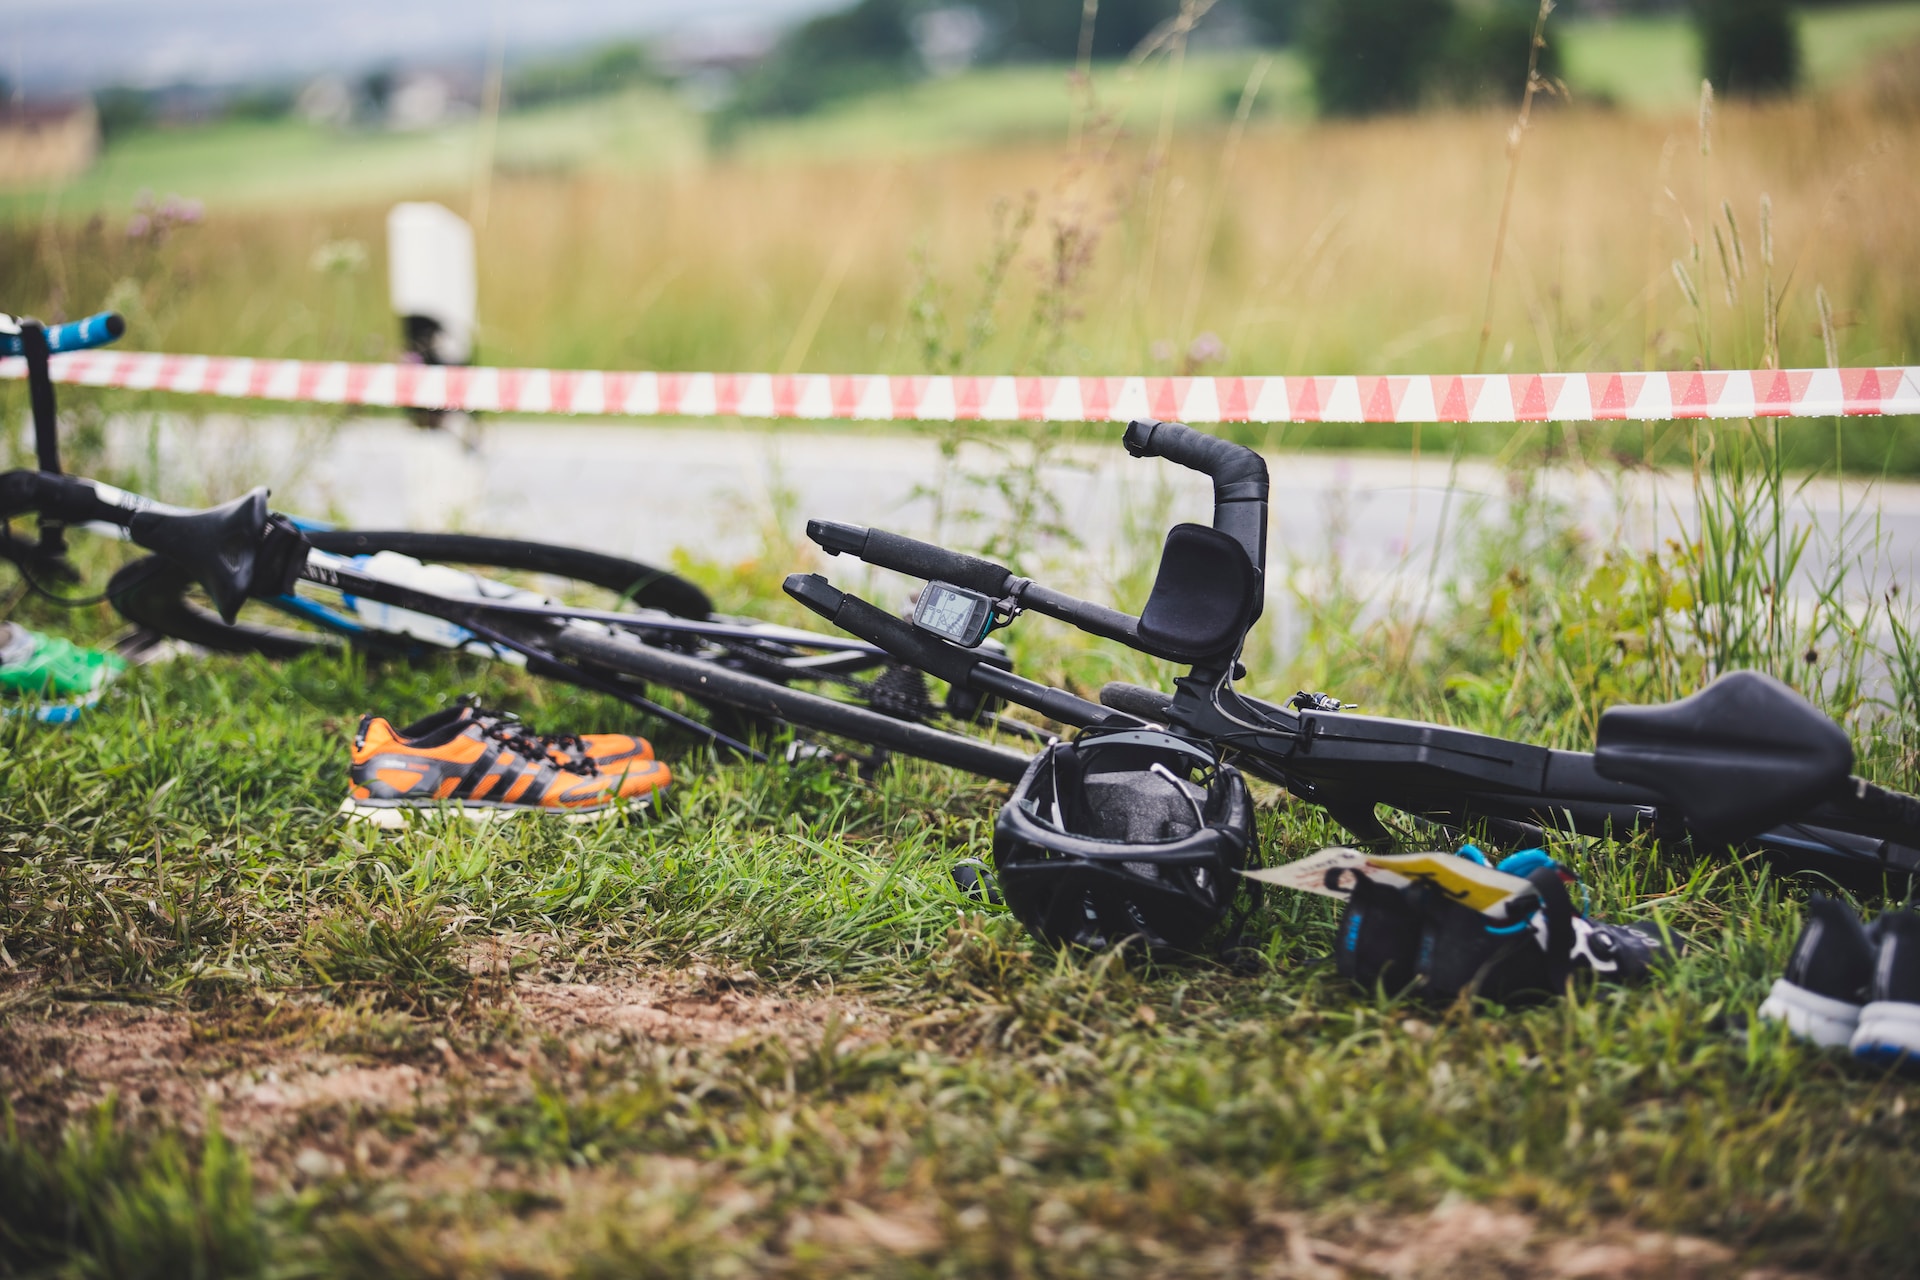 the image shows a bicyclist's equipment laying on the grass